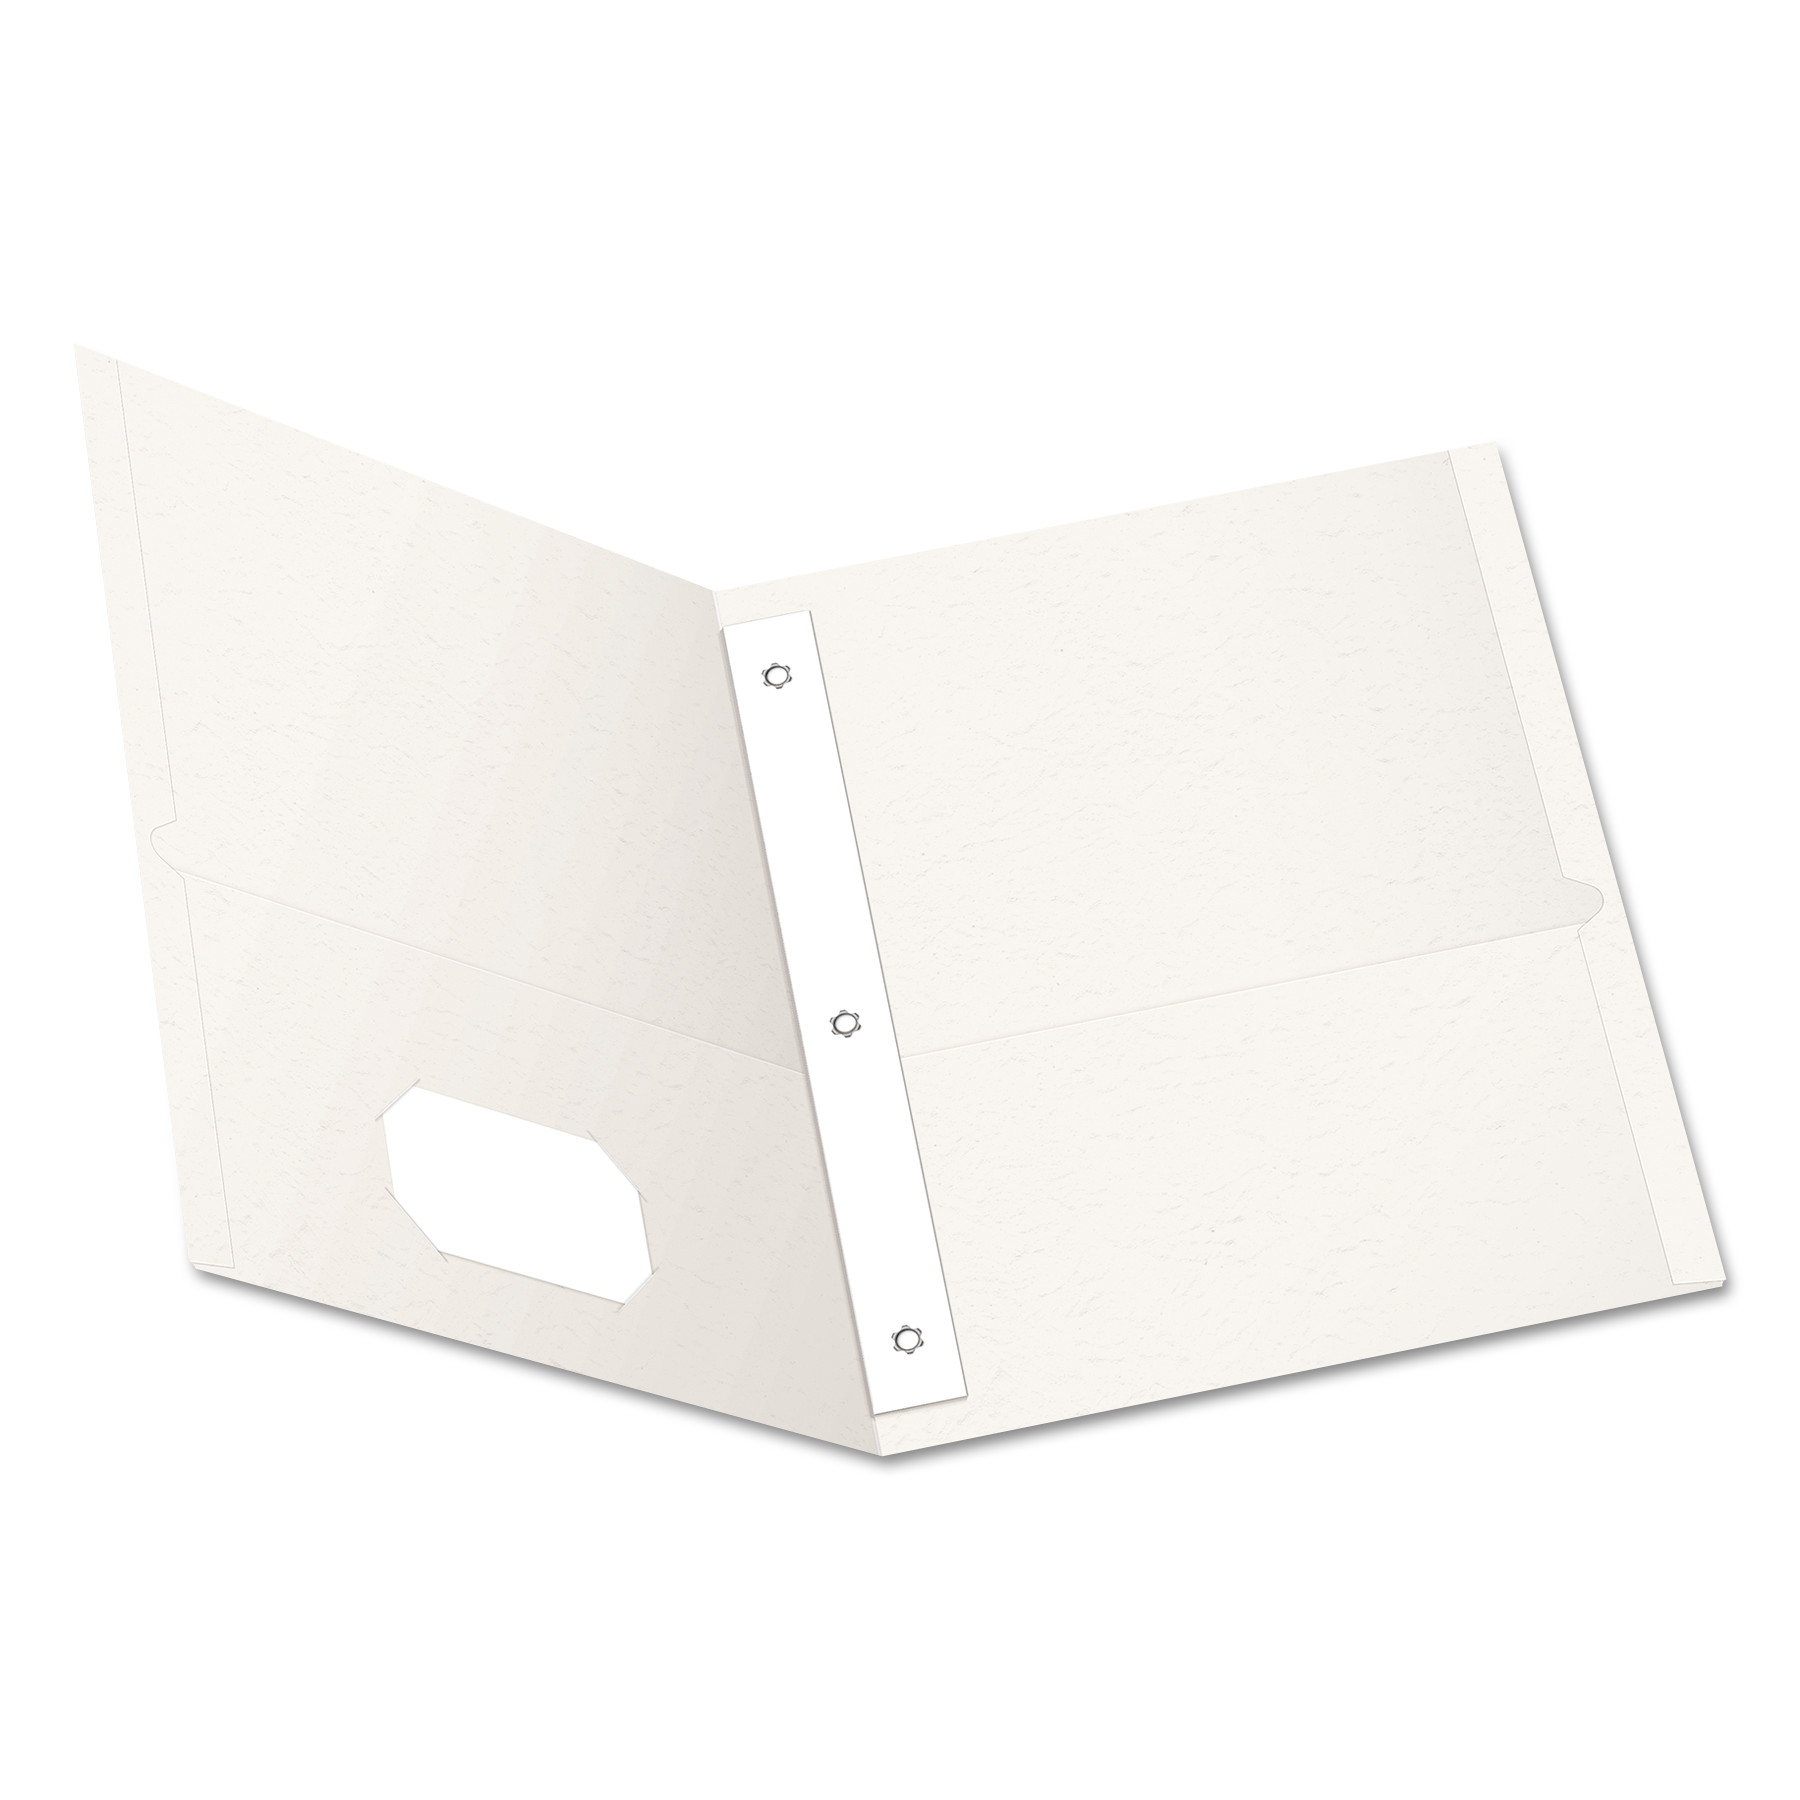 Amazon.com : WR Plastic Two Pocket Folder with 3 prongs for Office and  School-6 Pack (Multi-Color) : Office Products